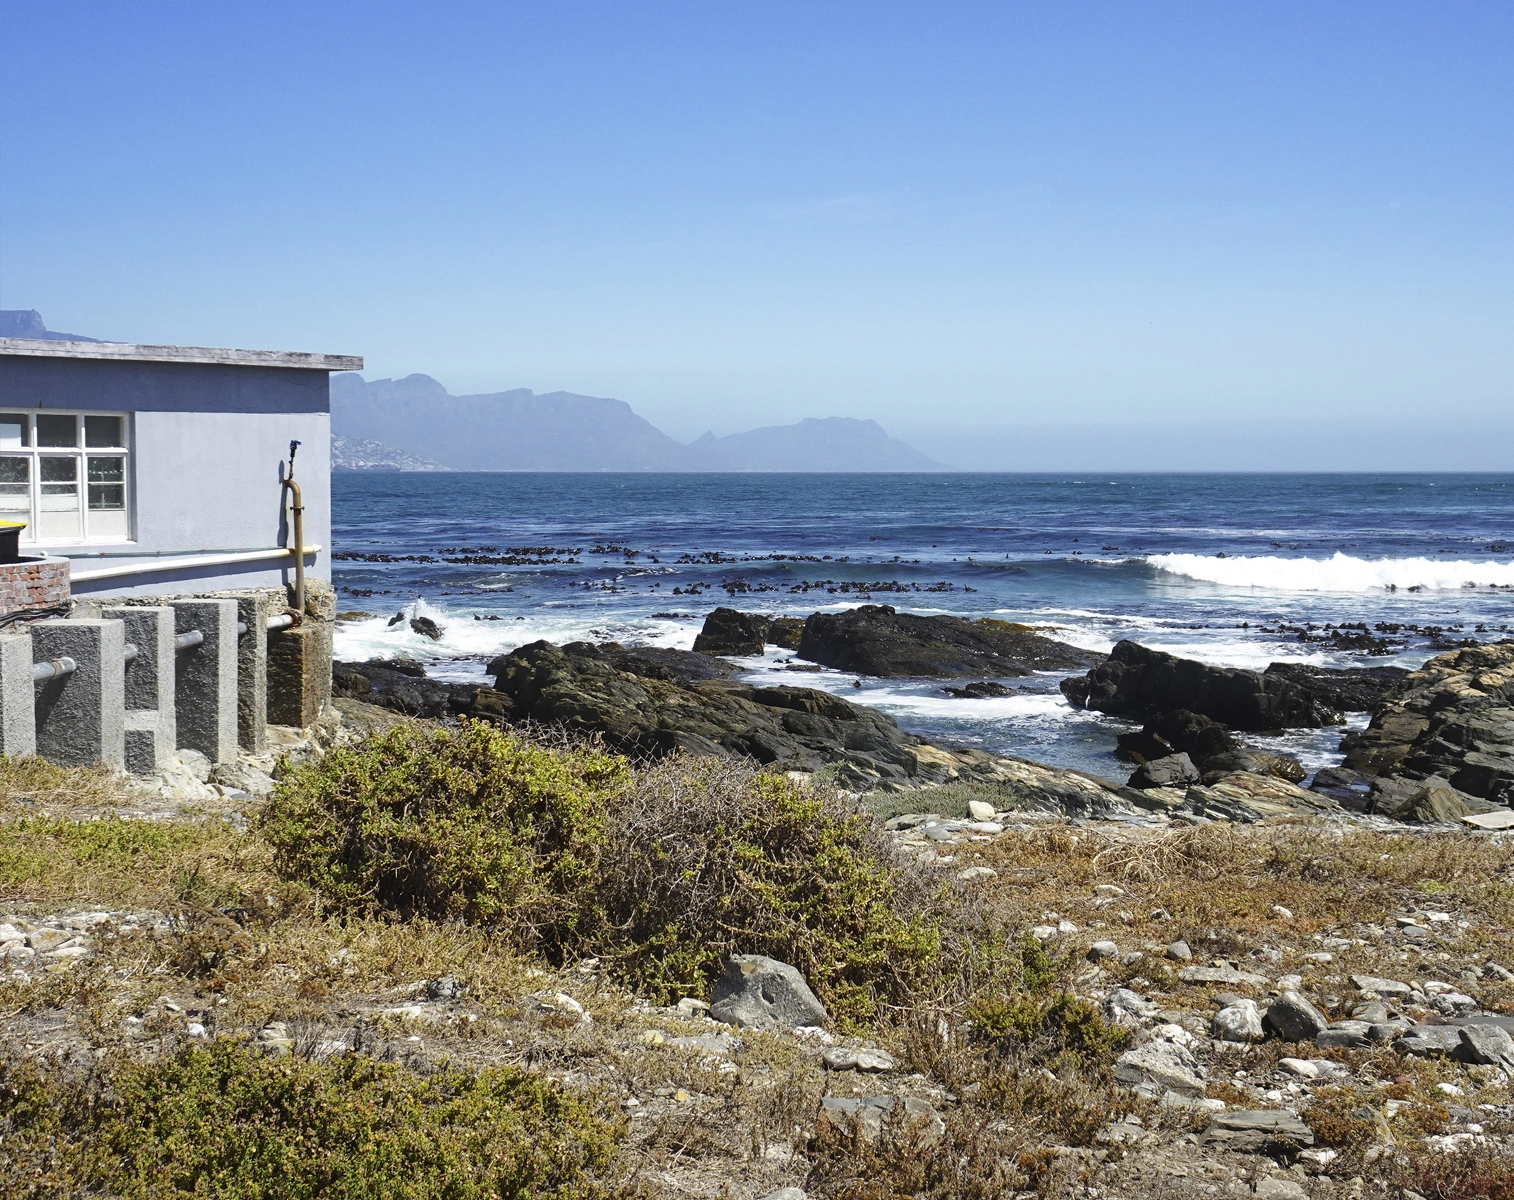 Photograph was taken from Robben Island by Peter Segasby